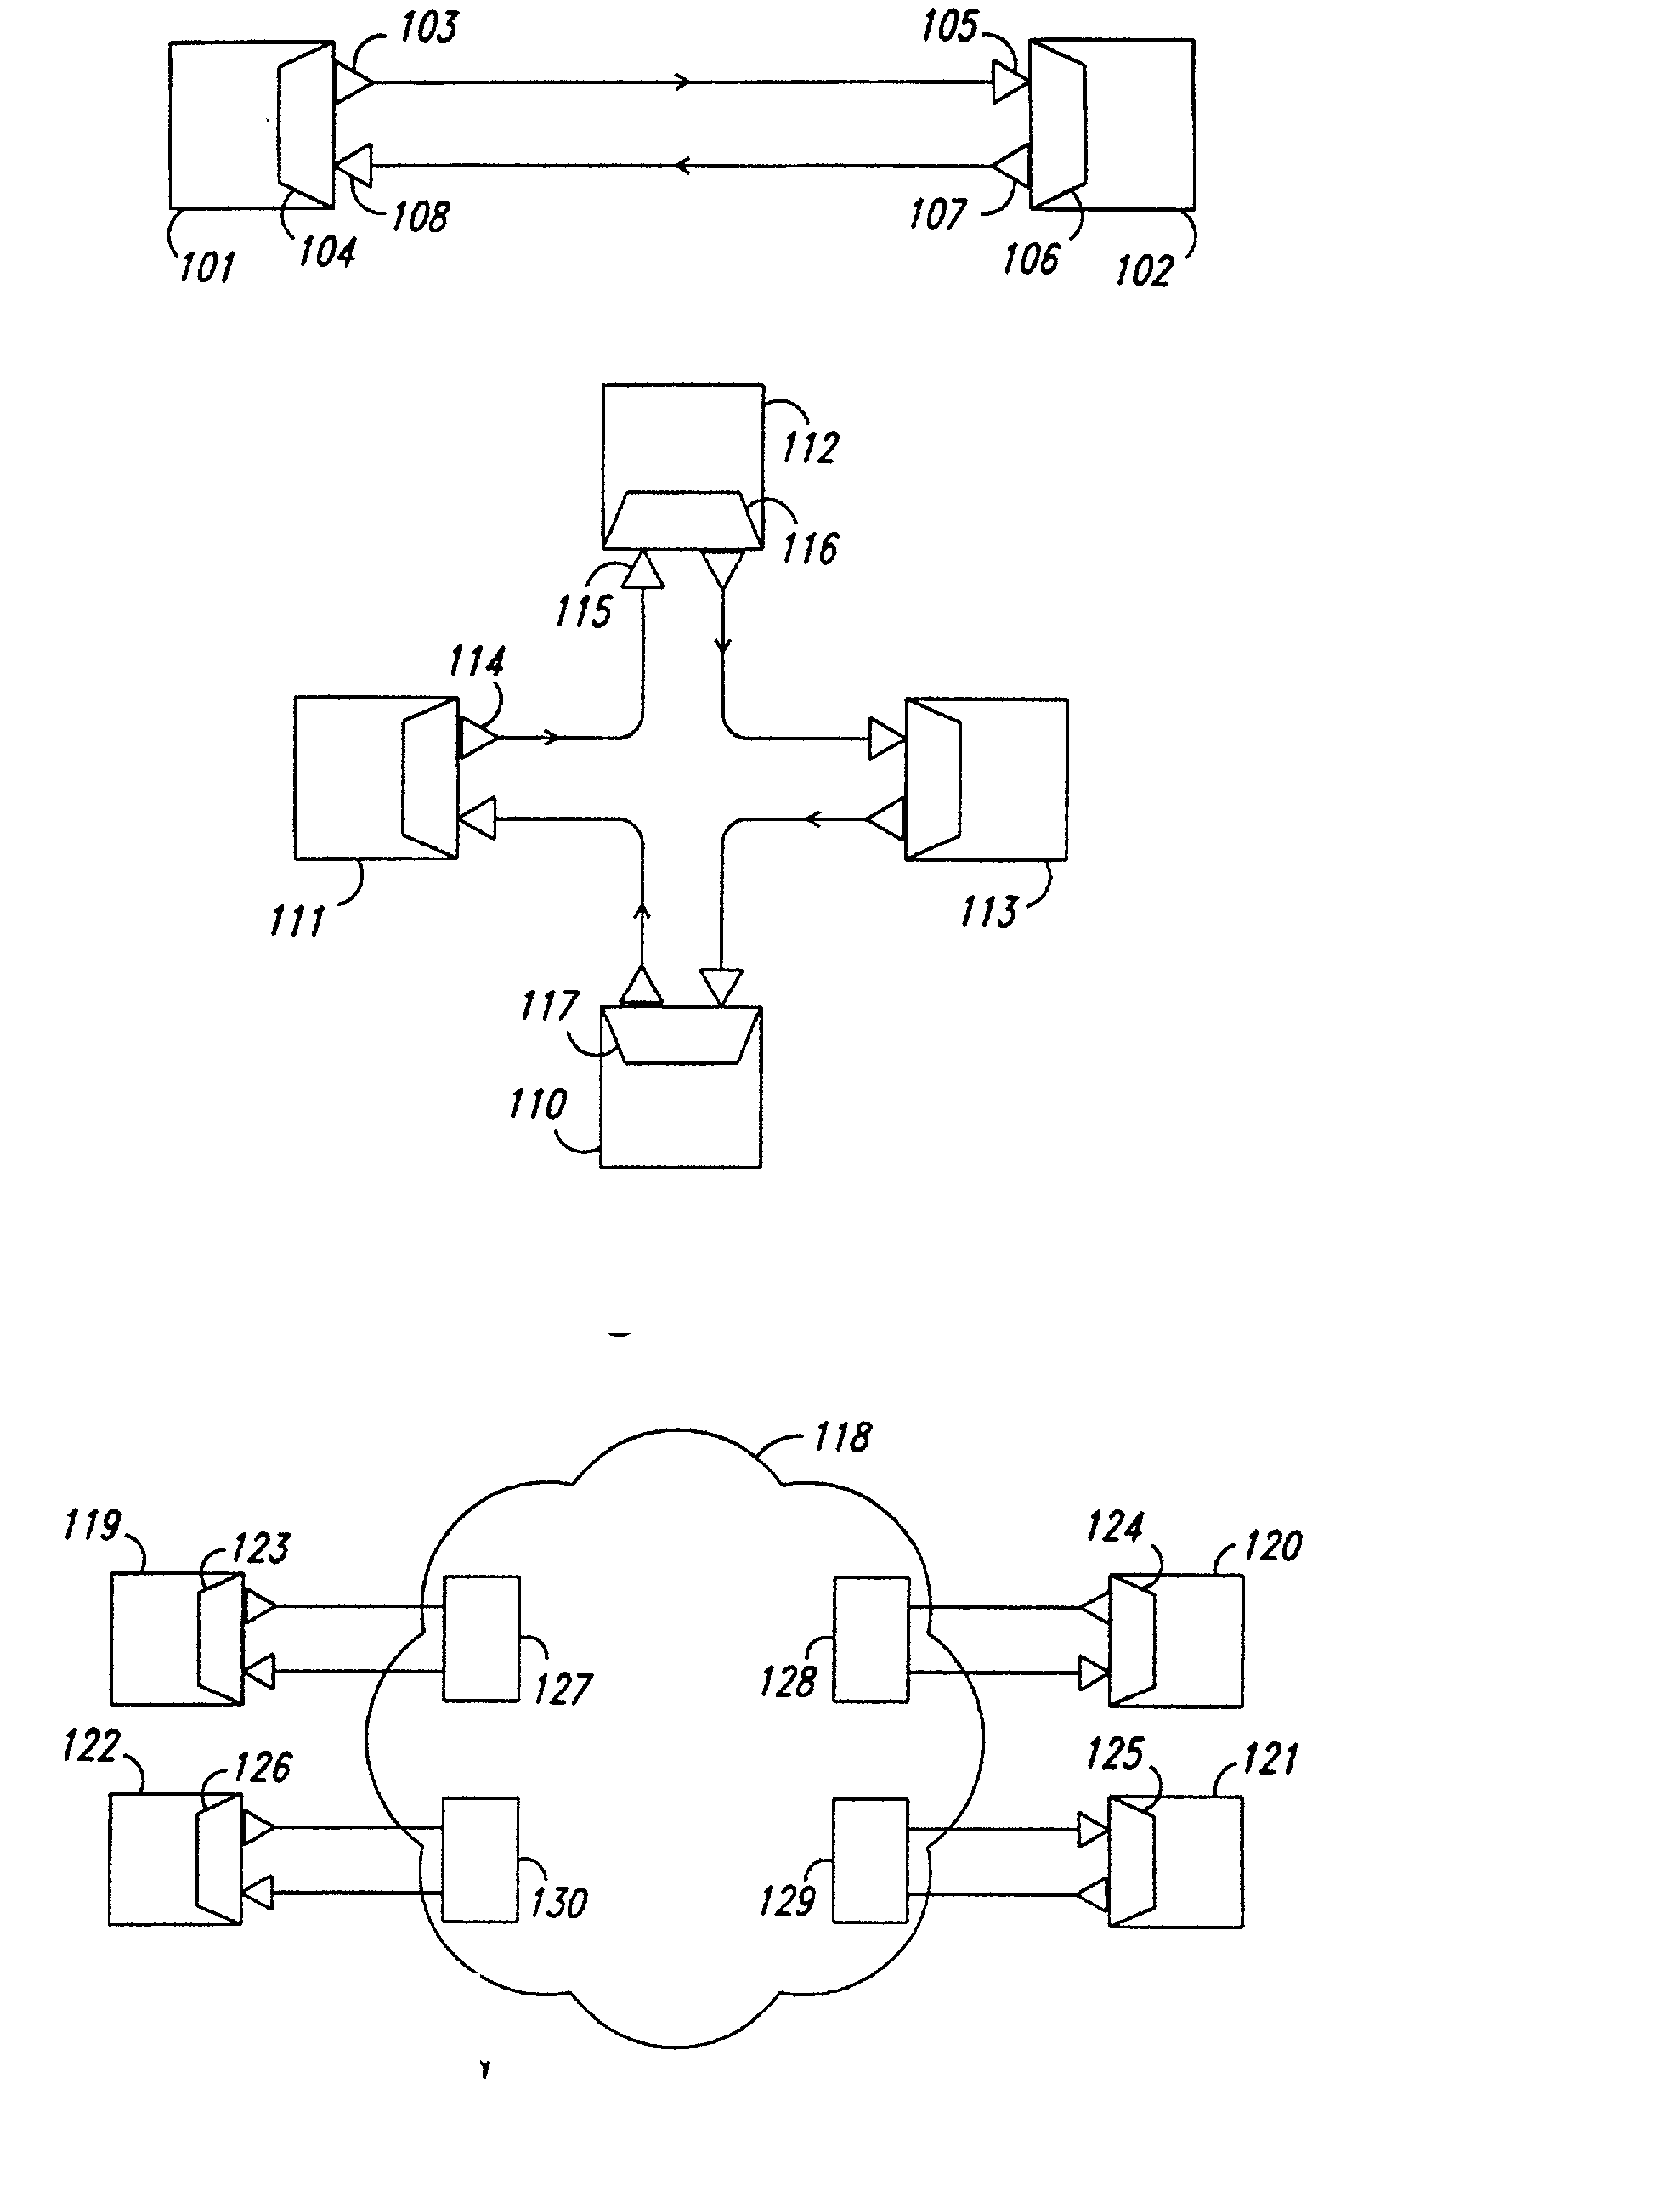 Method and system for enhancing fibre channel loop resiliency for a mass storage enclosure by increasing component redundancy and using shunt elements and intelligent bypass management